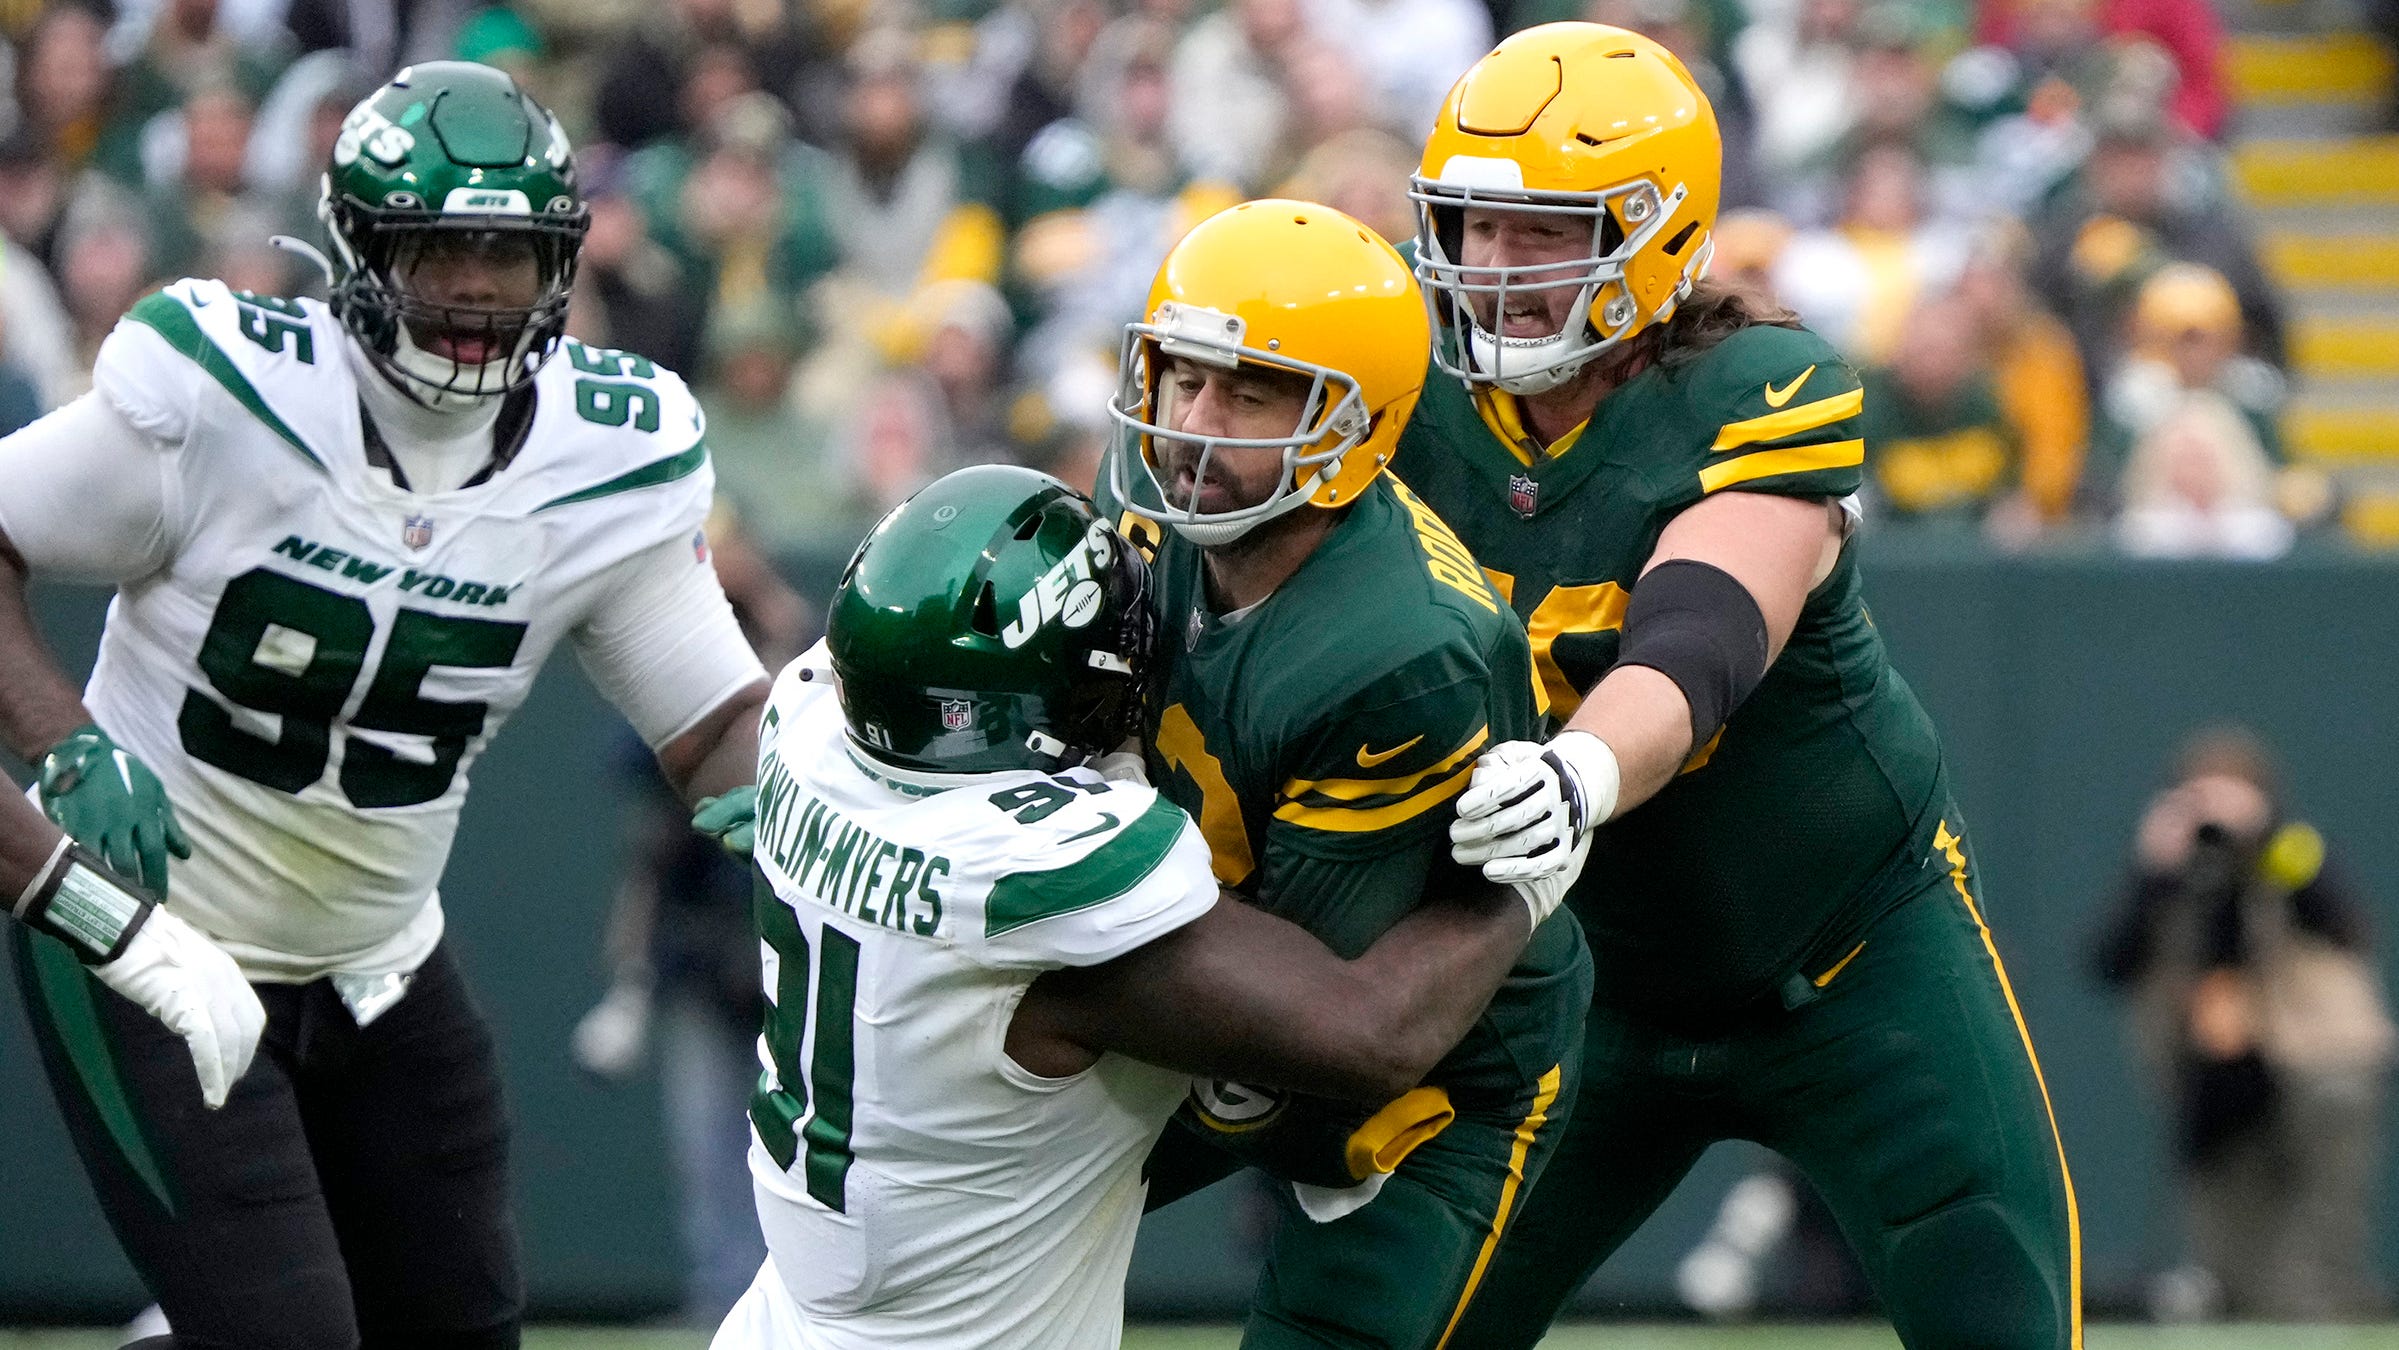 Green Bay Packers must reconsider who plays on their offensive line after the New York Jets overwhelm them